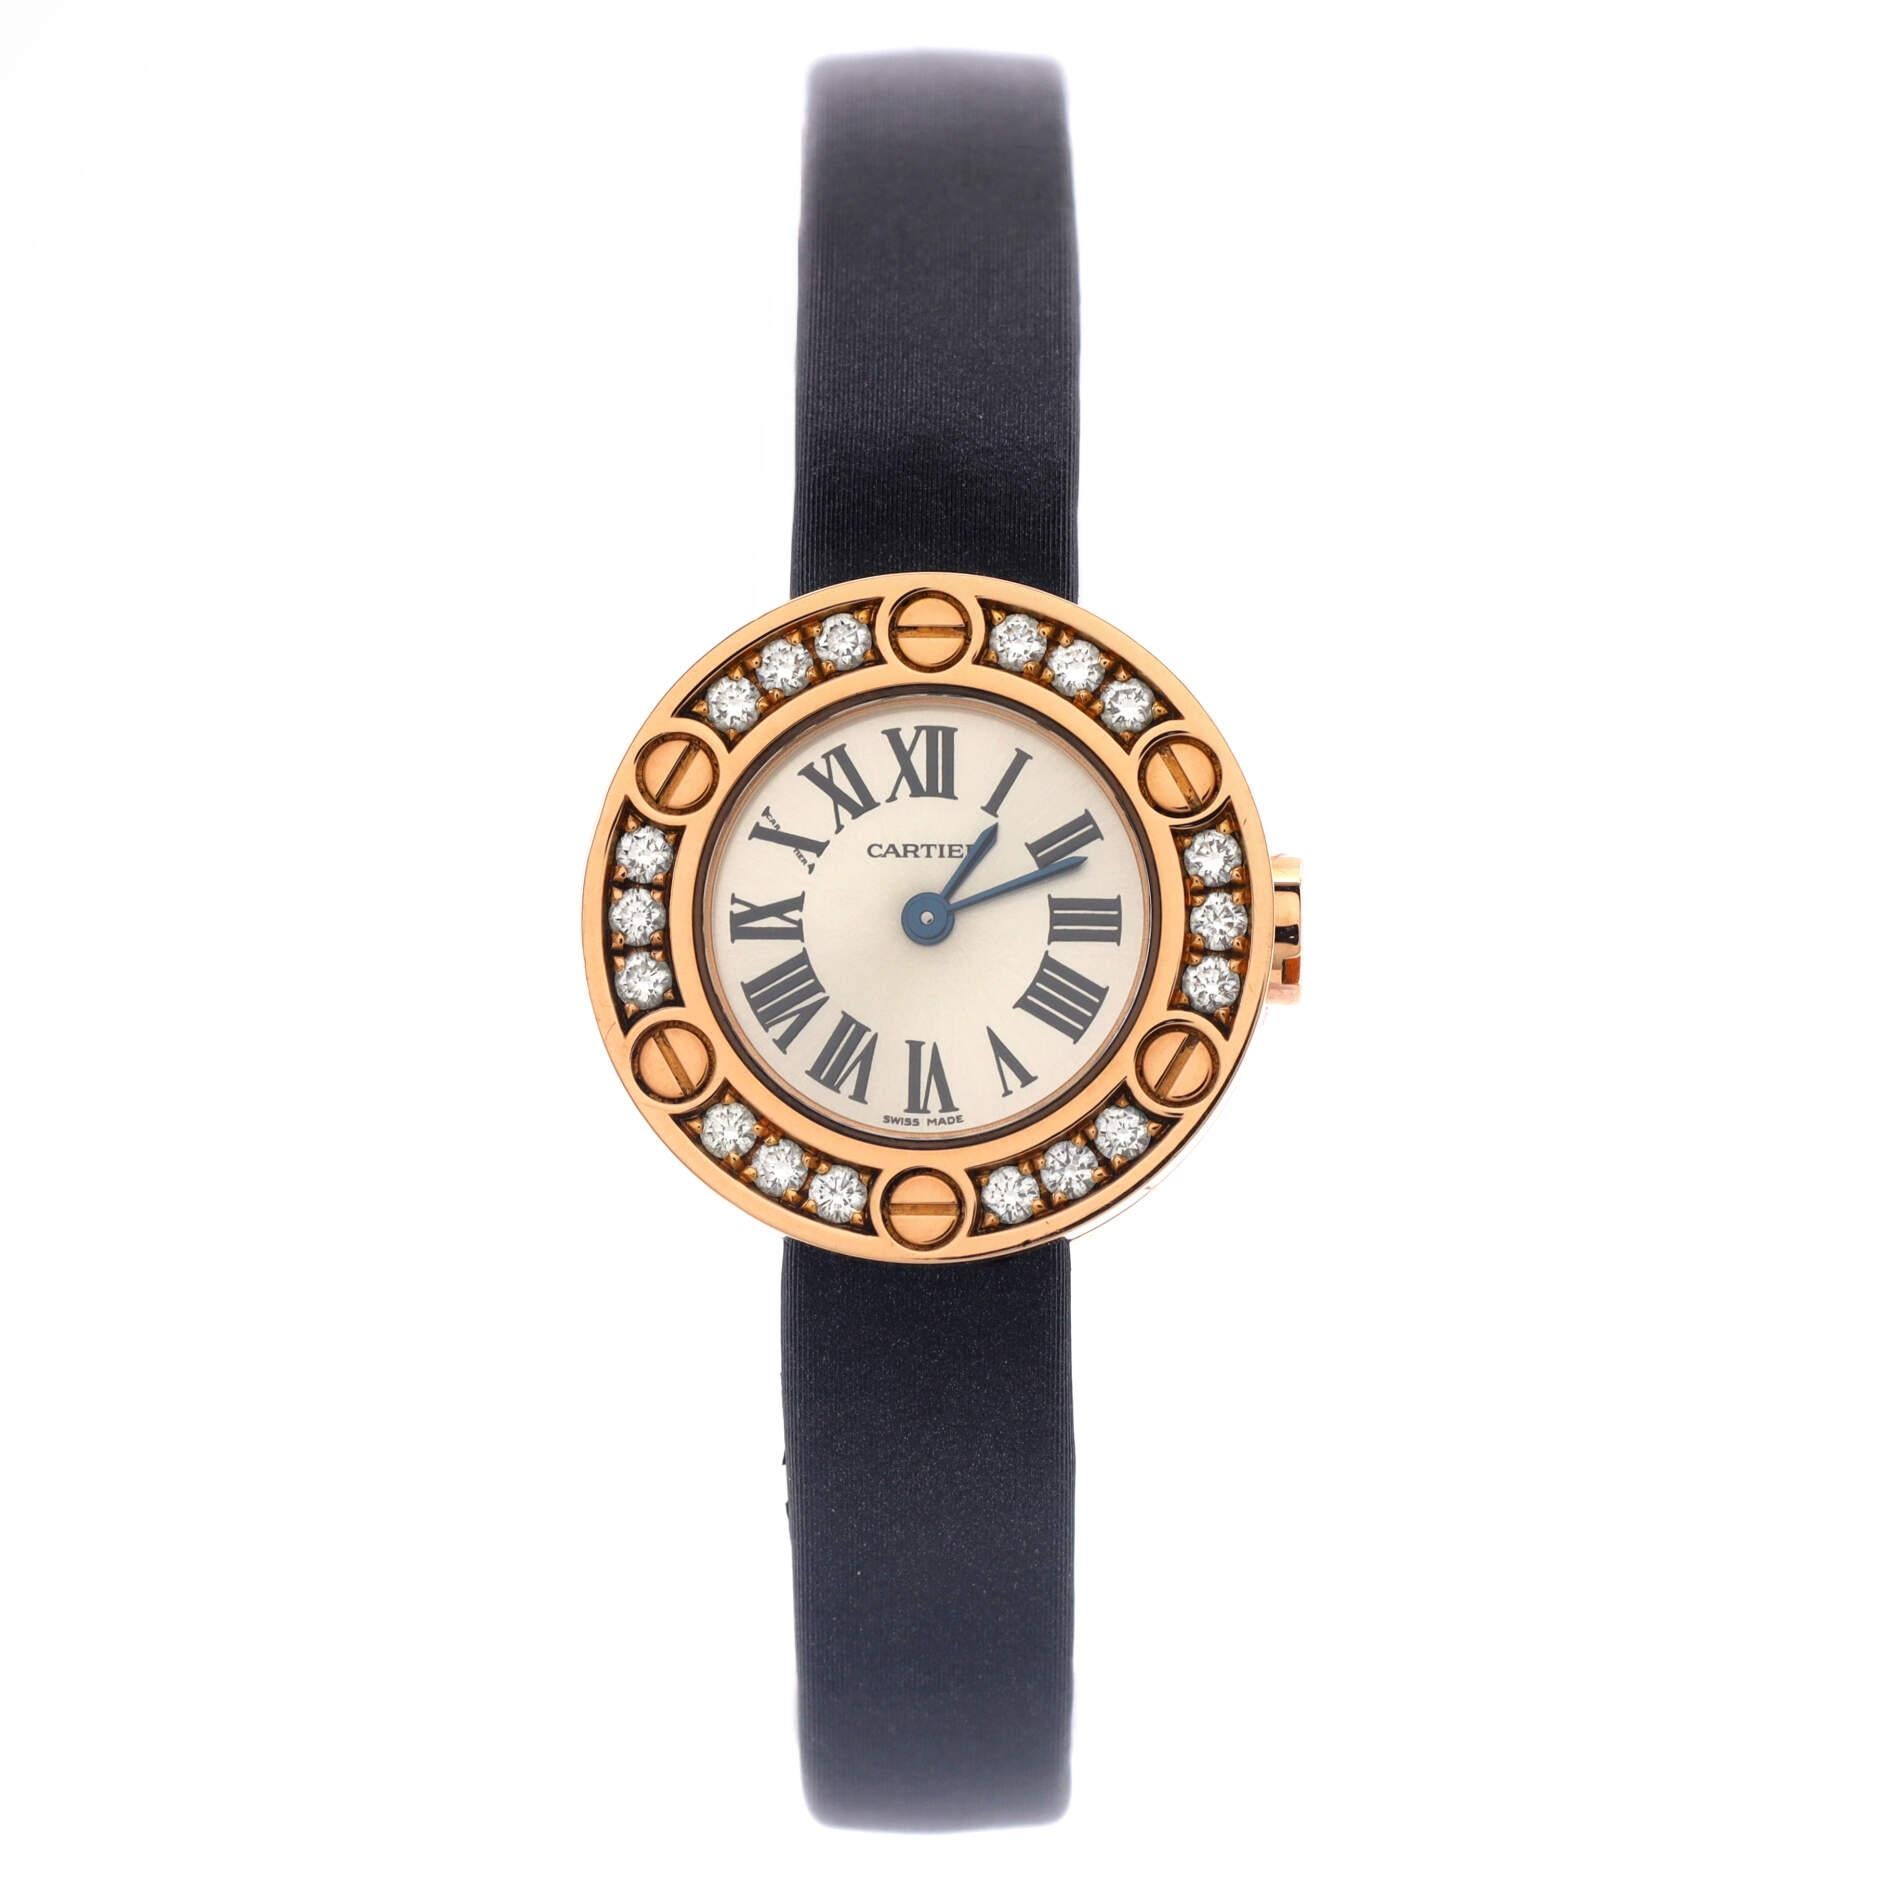 Condition: Great. Minor wear throughout case and strap.
Accessories: No Accessories
Measurements: Case Size/Width: 23mm, Watch Height: 6mm, Band Width: 9mm, Wrist circumference: 6.0